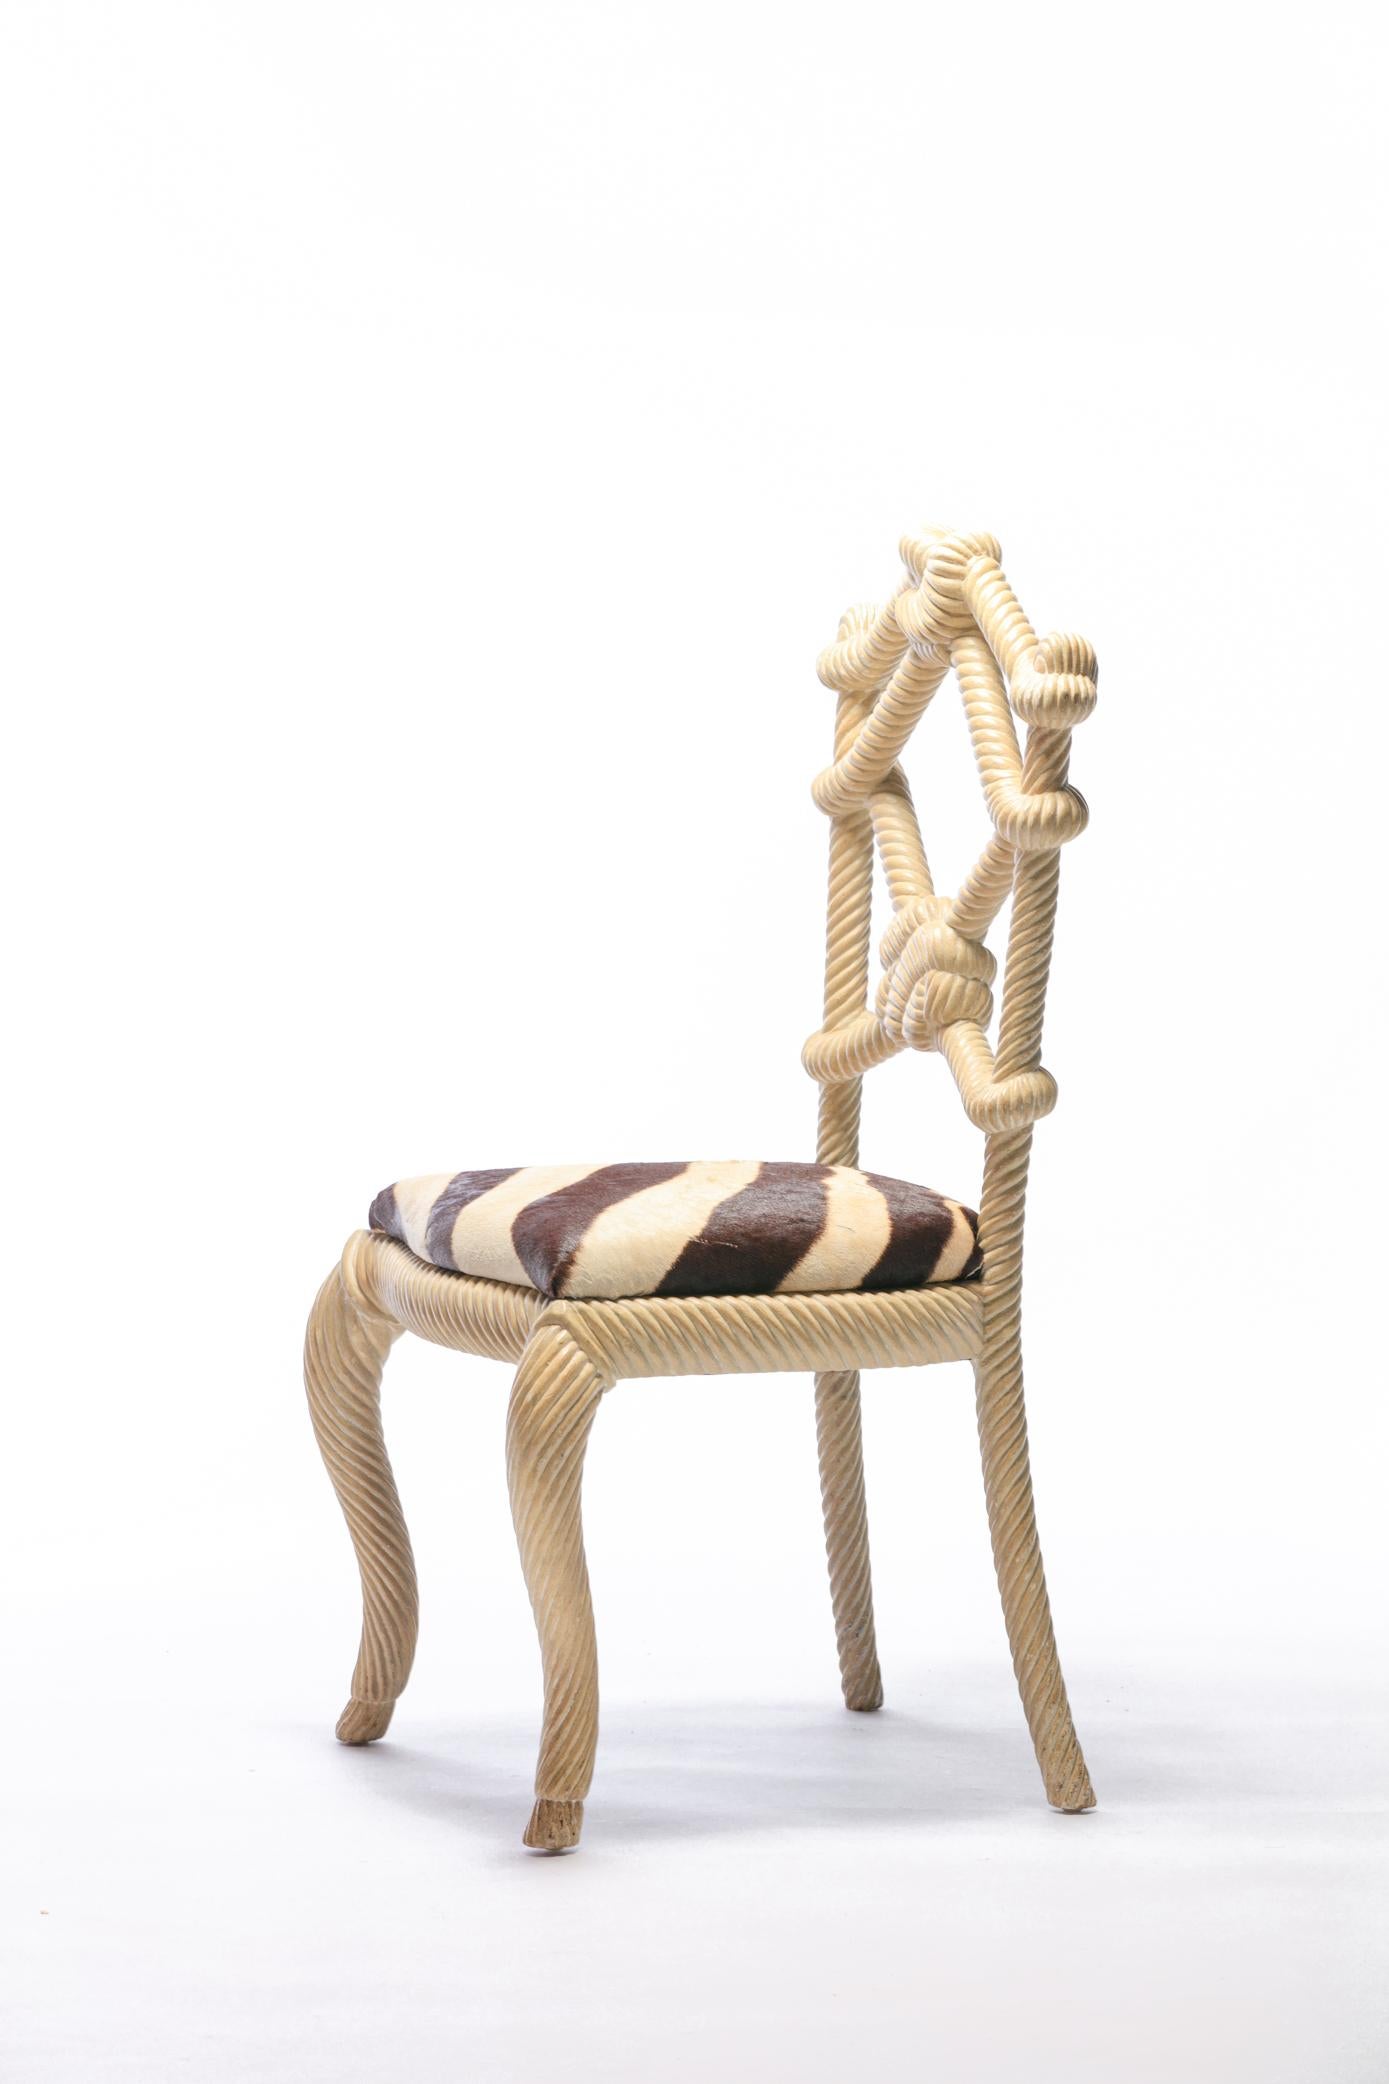 American Pair of Rope Chairs from Viceroy Miami with Zebra Hide Upholstered Seats